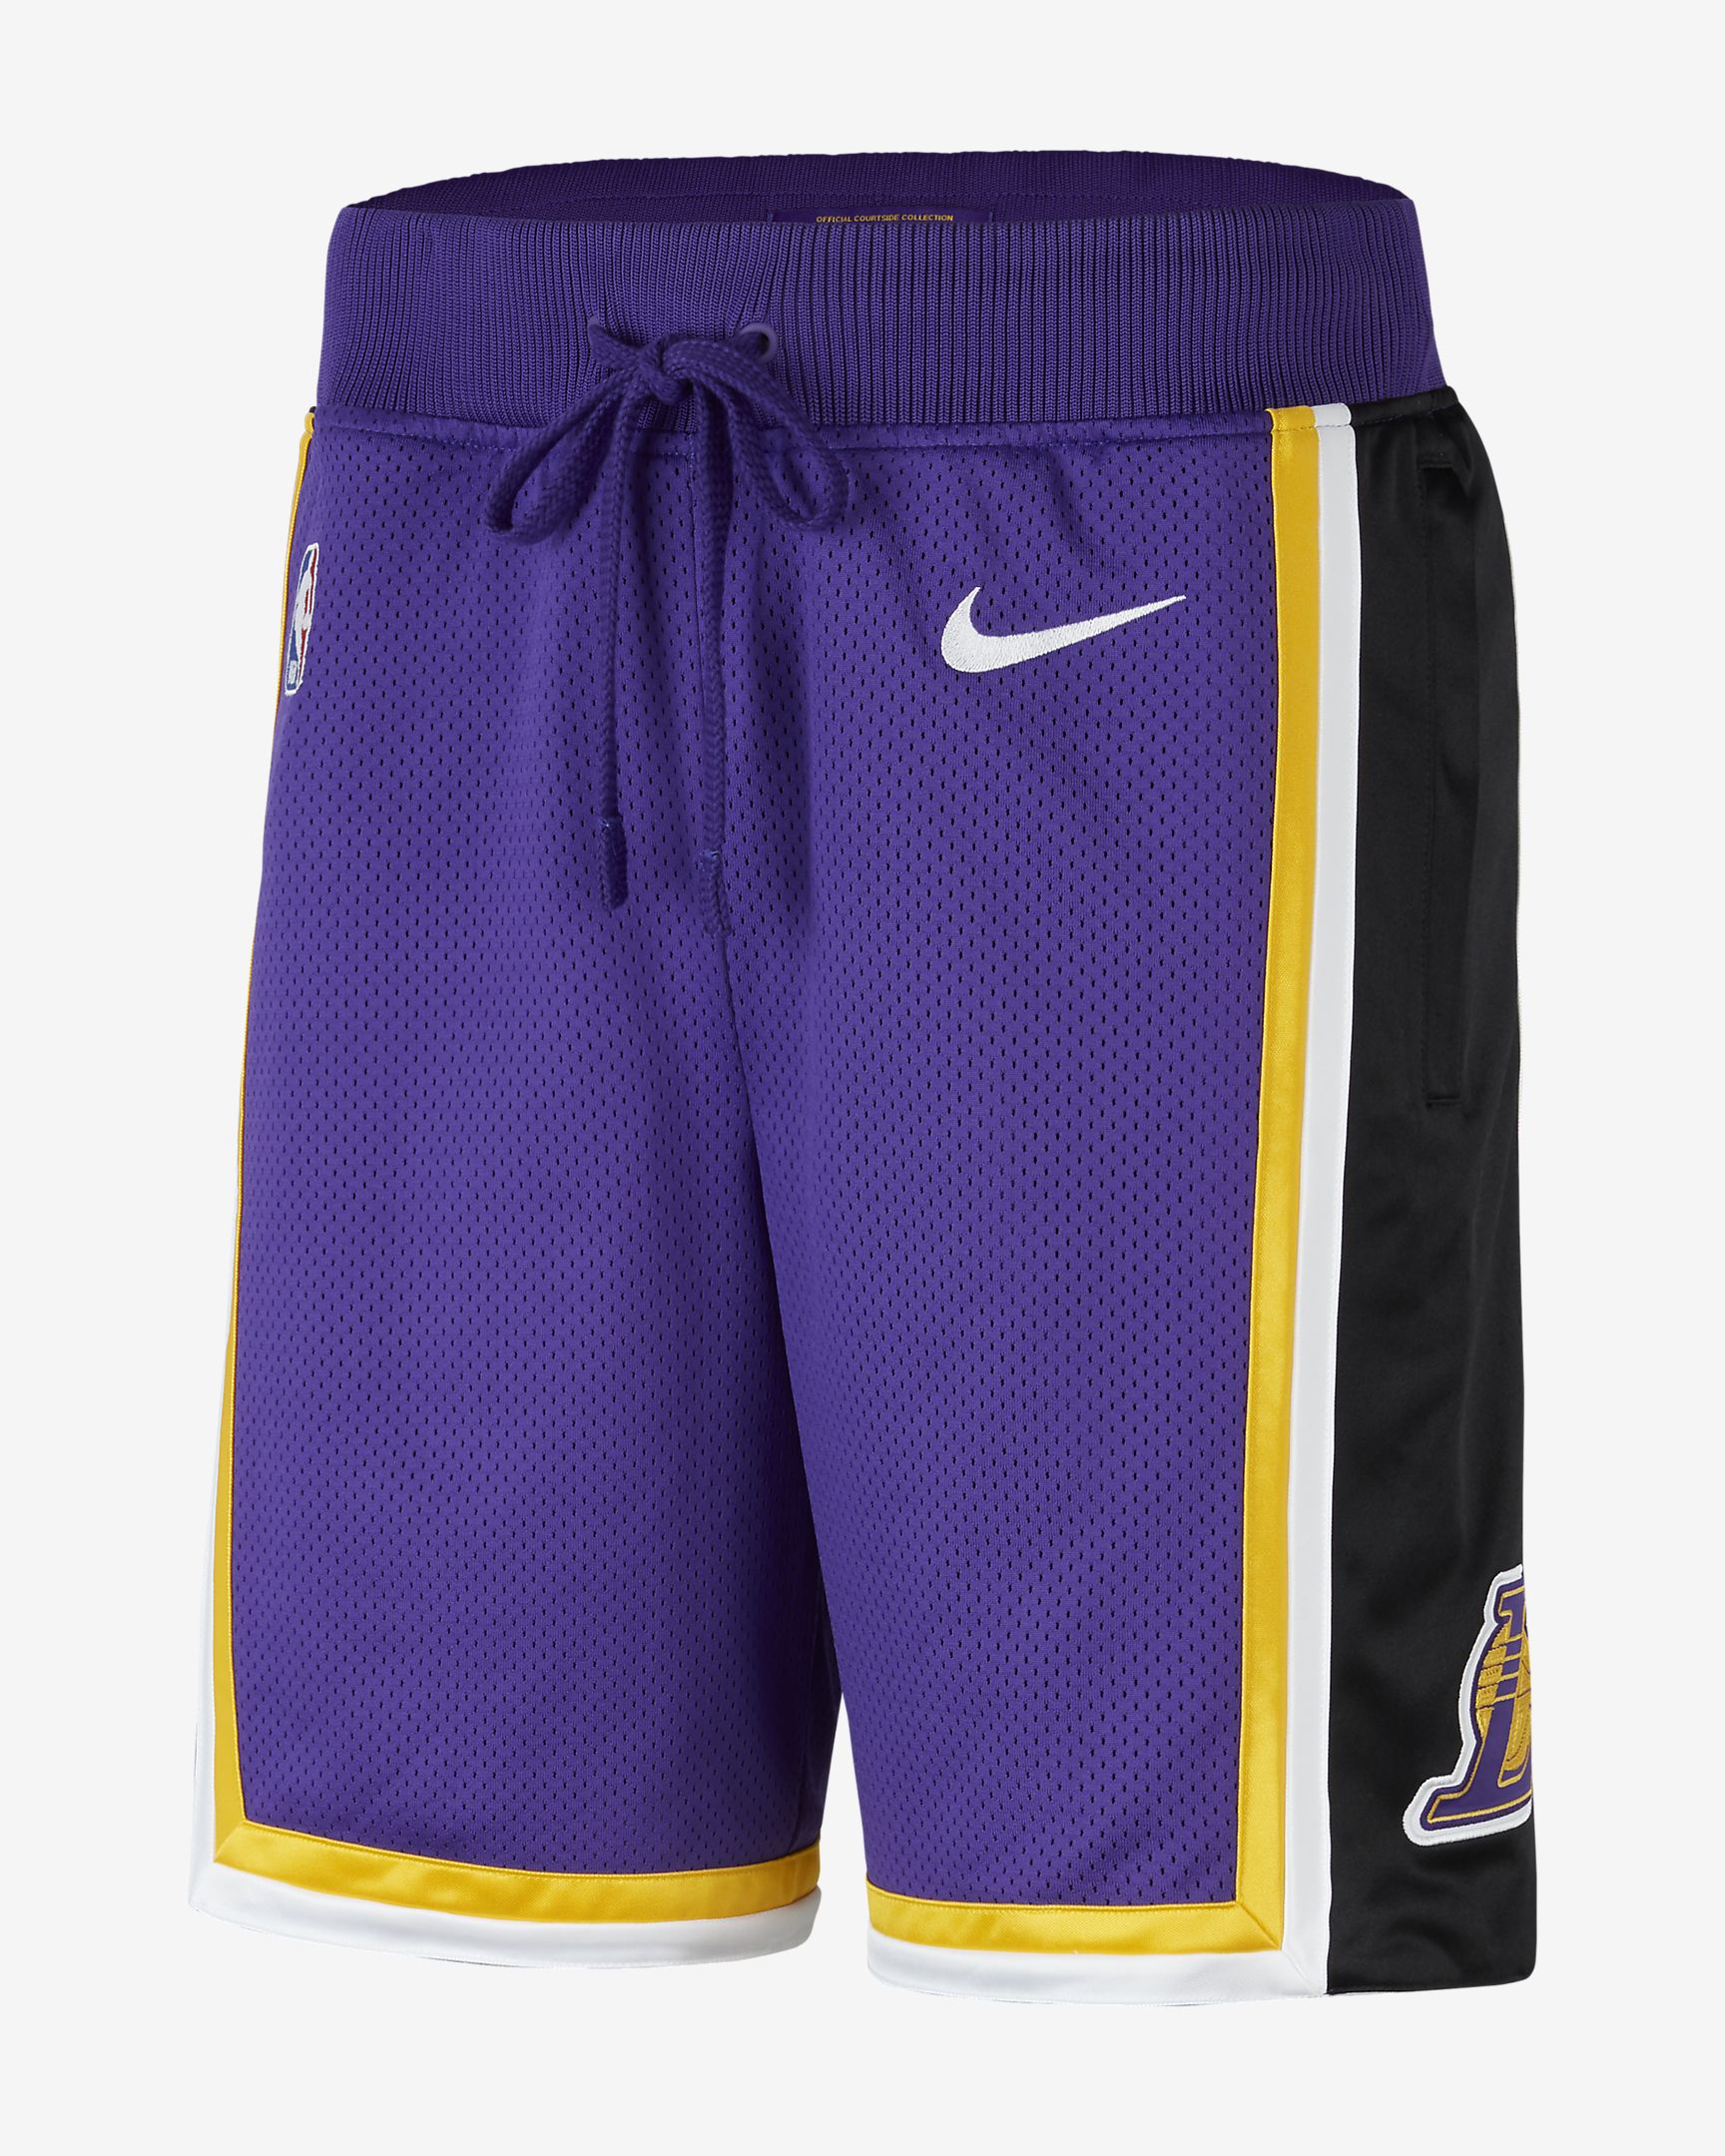 SOLELINKS X:ssä: Ad: Nike NBA Lakers Courtside Statement Edition